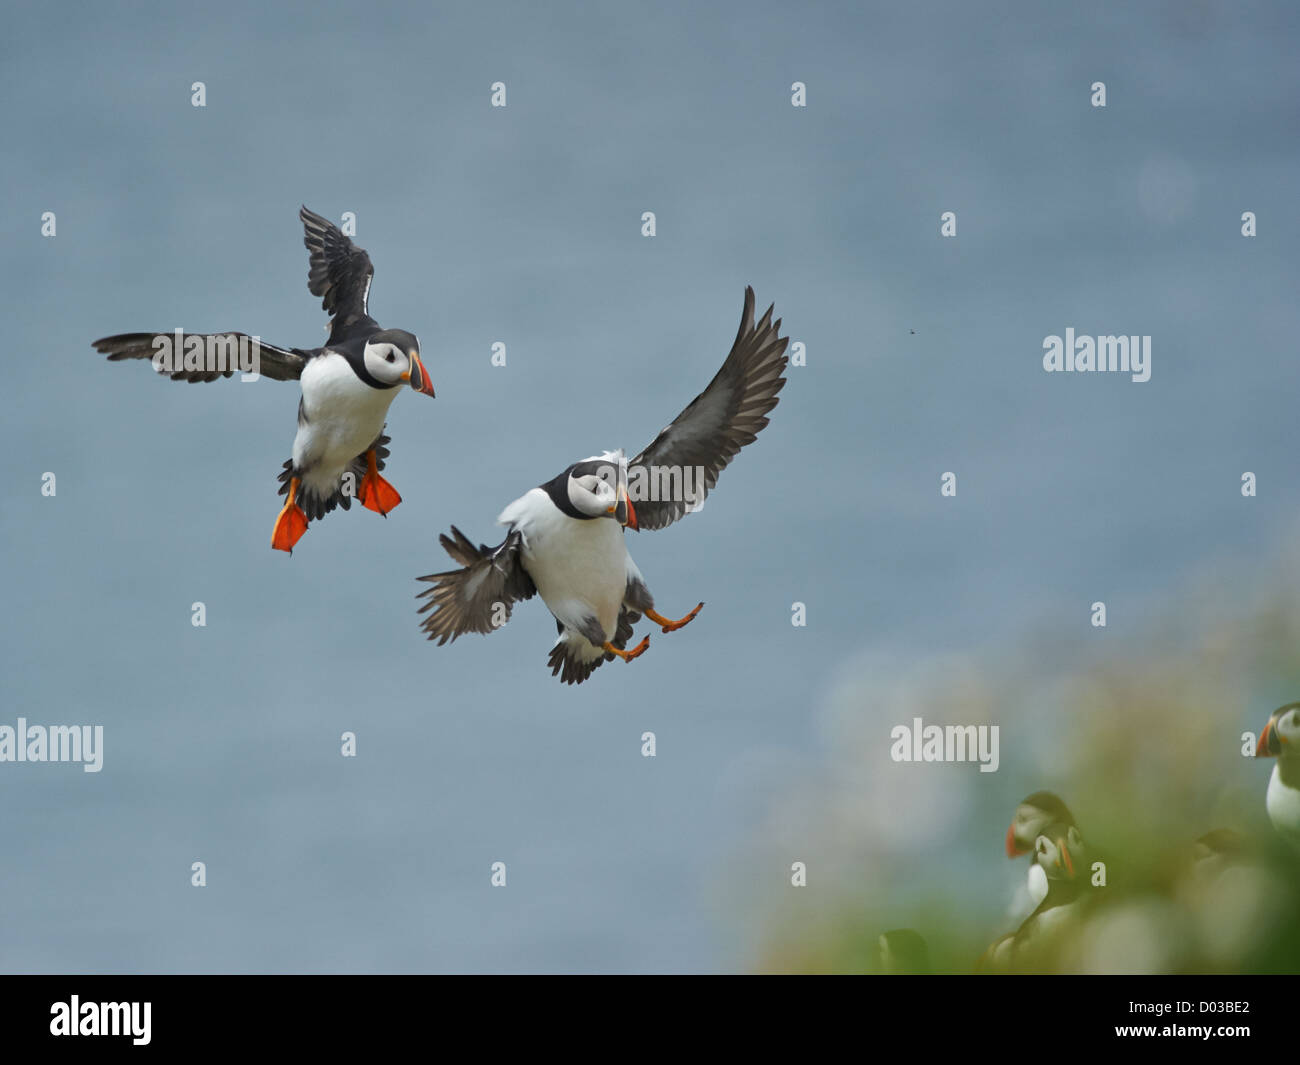 Puffin in flight carrying sand eels Stock Photo